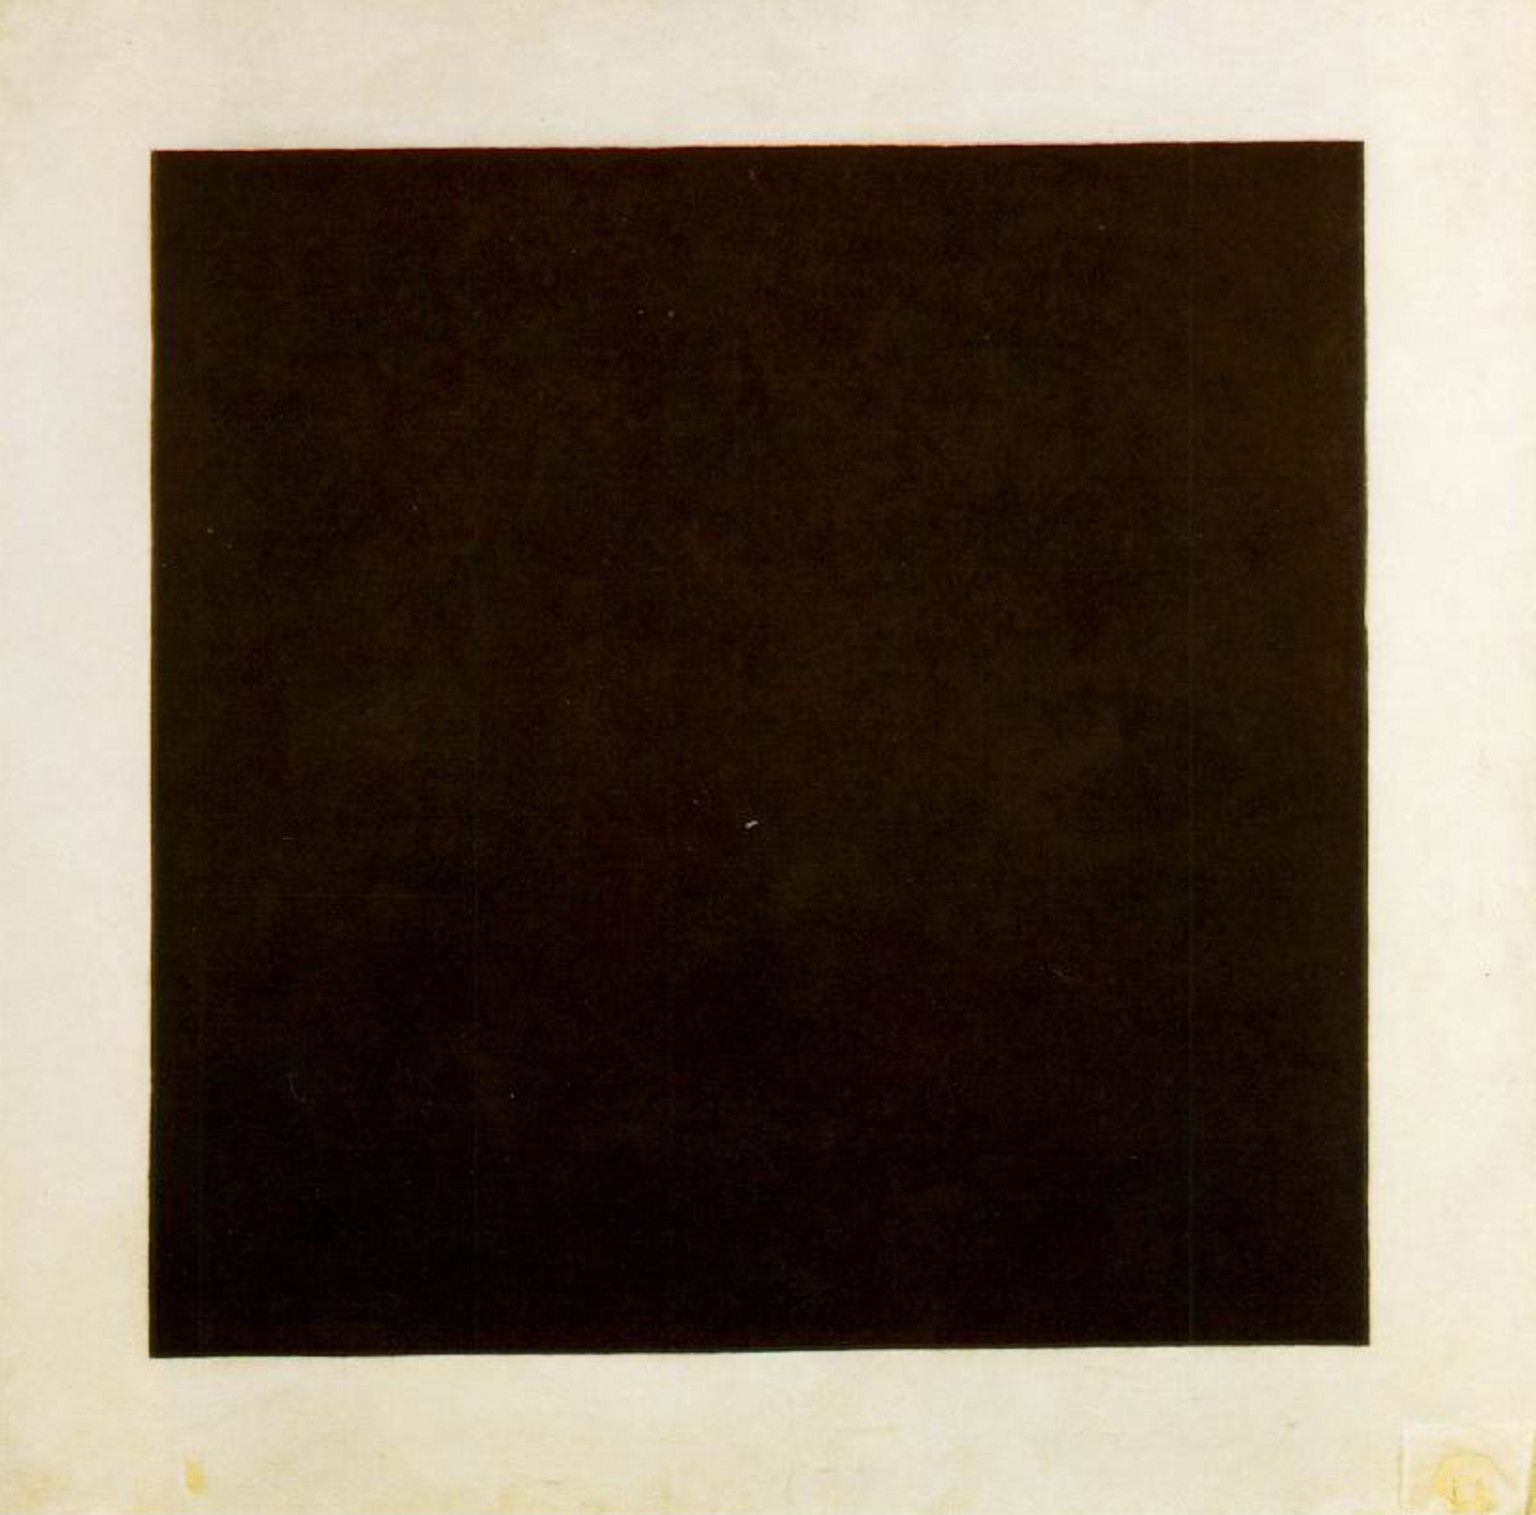 Kazimir Malevich: Black Square. 1915. Oil on canvas 79.5 x 79. 5 cm. Collection Tretyakov Gallery, Moscow